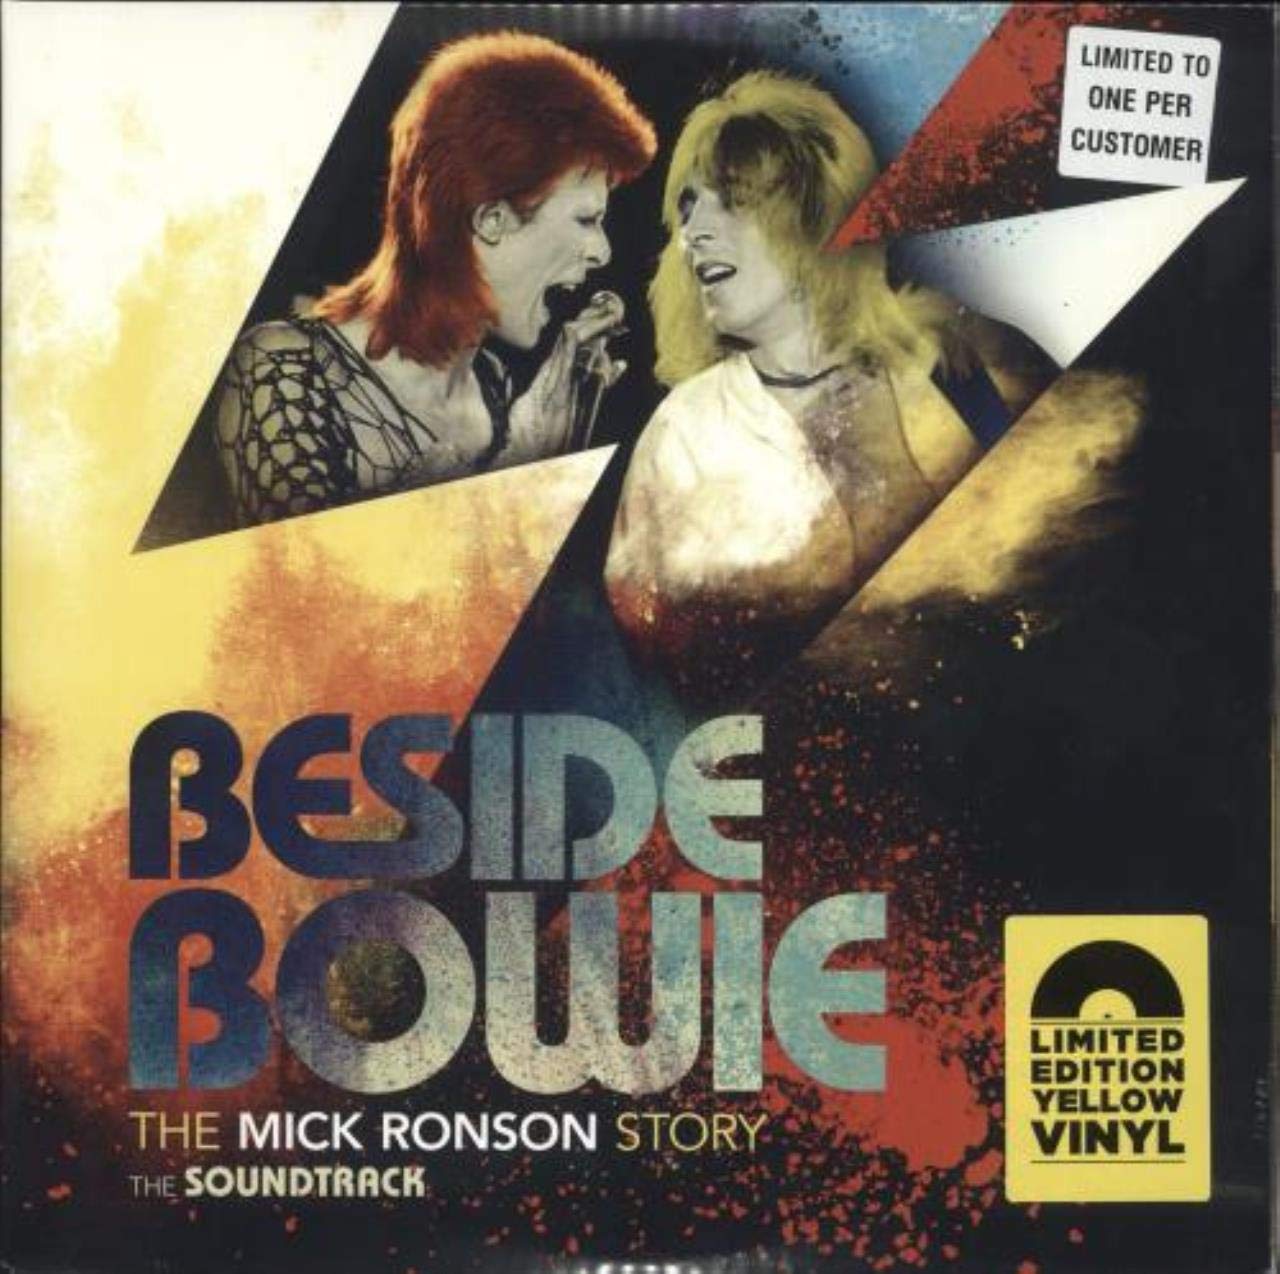 Beside Bowie: The Mick Ronson Story - Vinyl